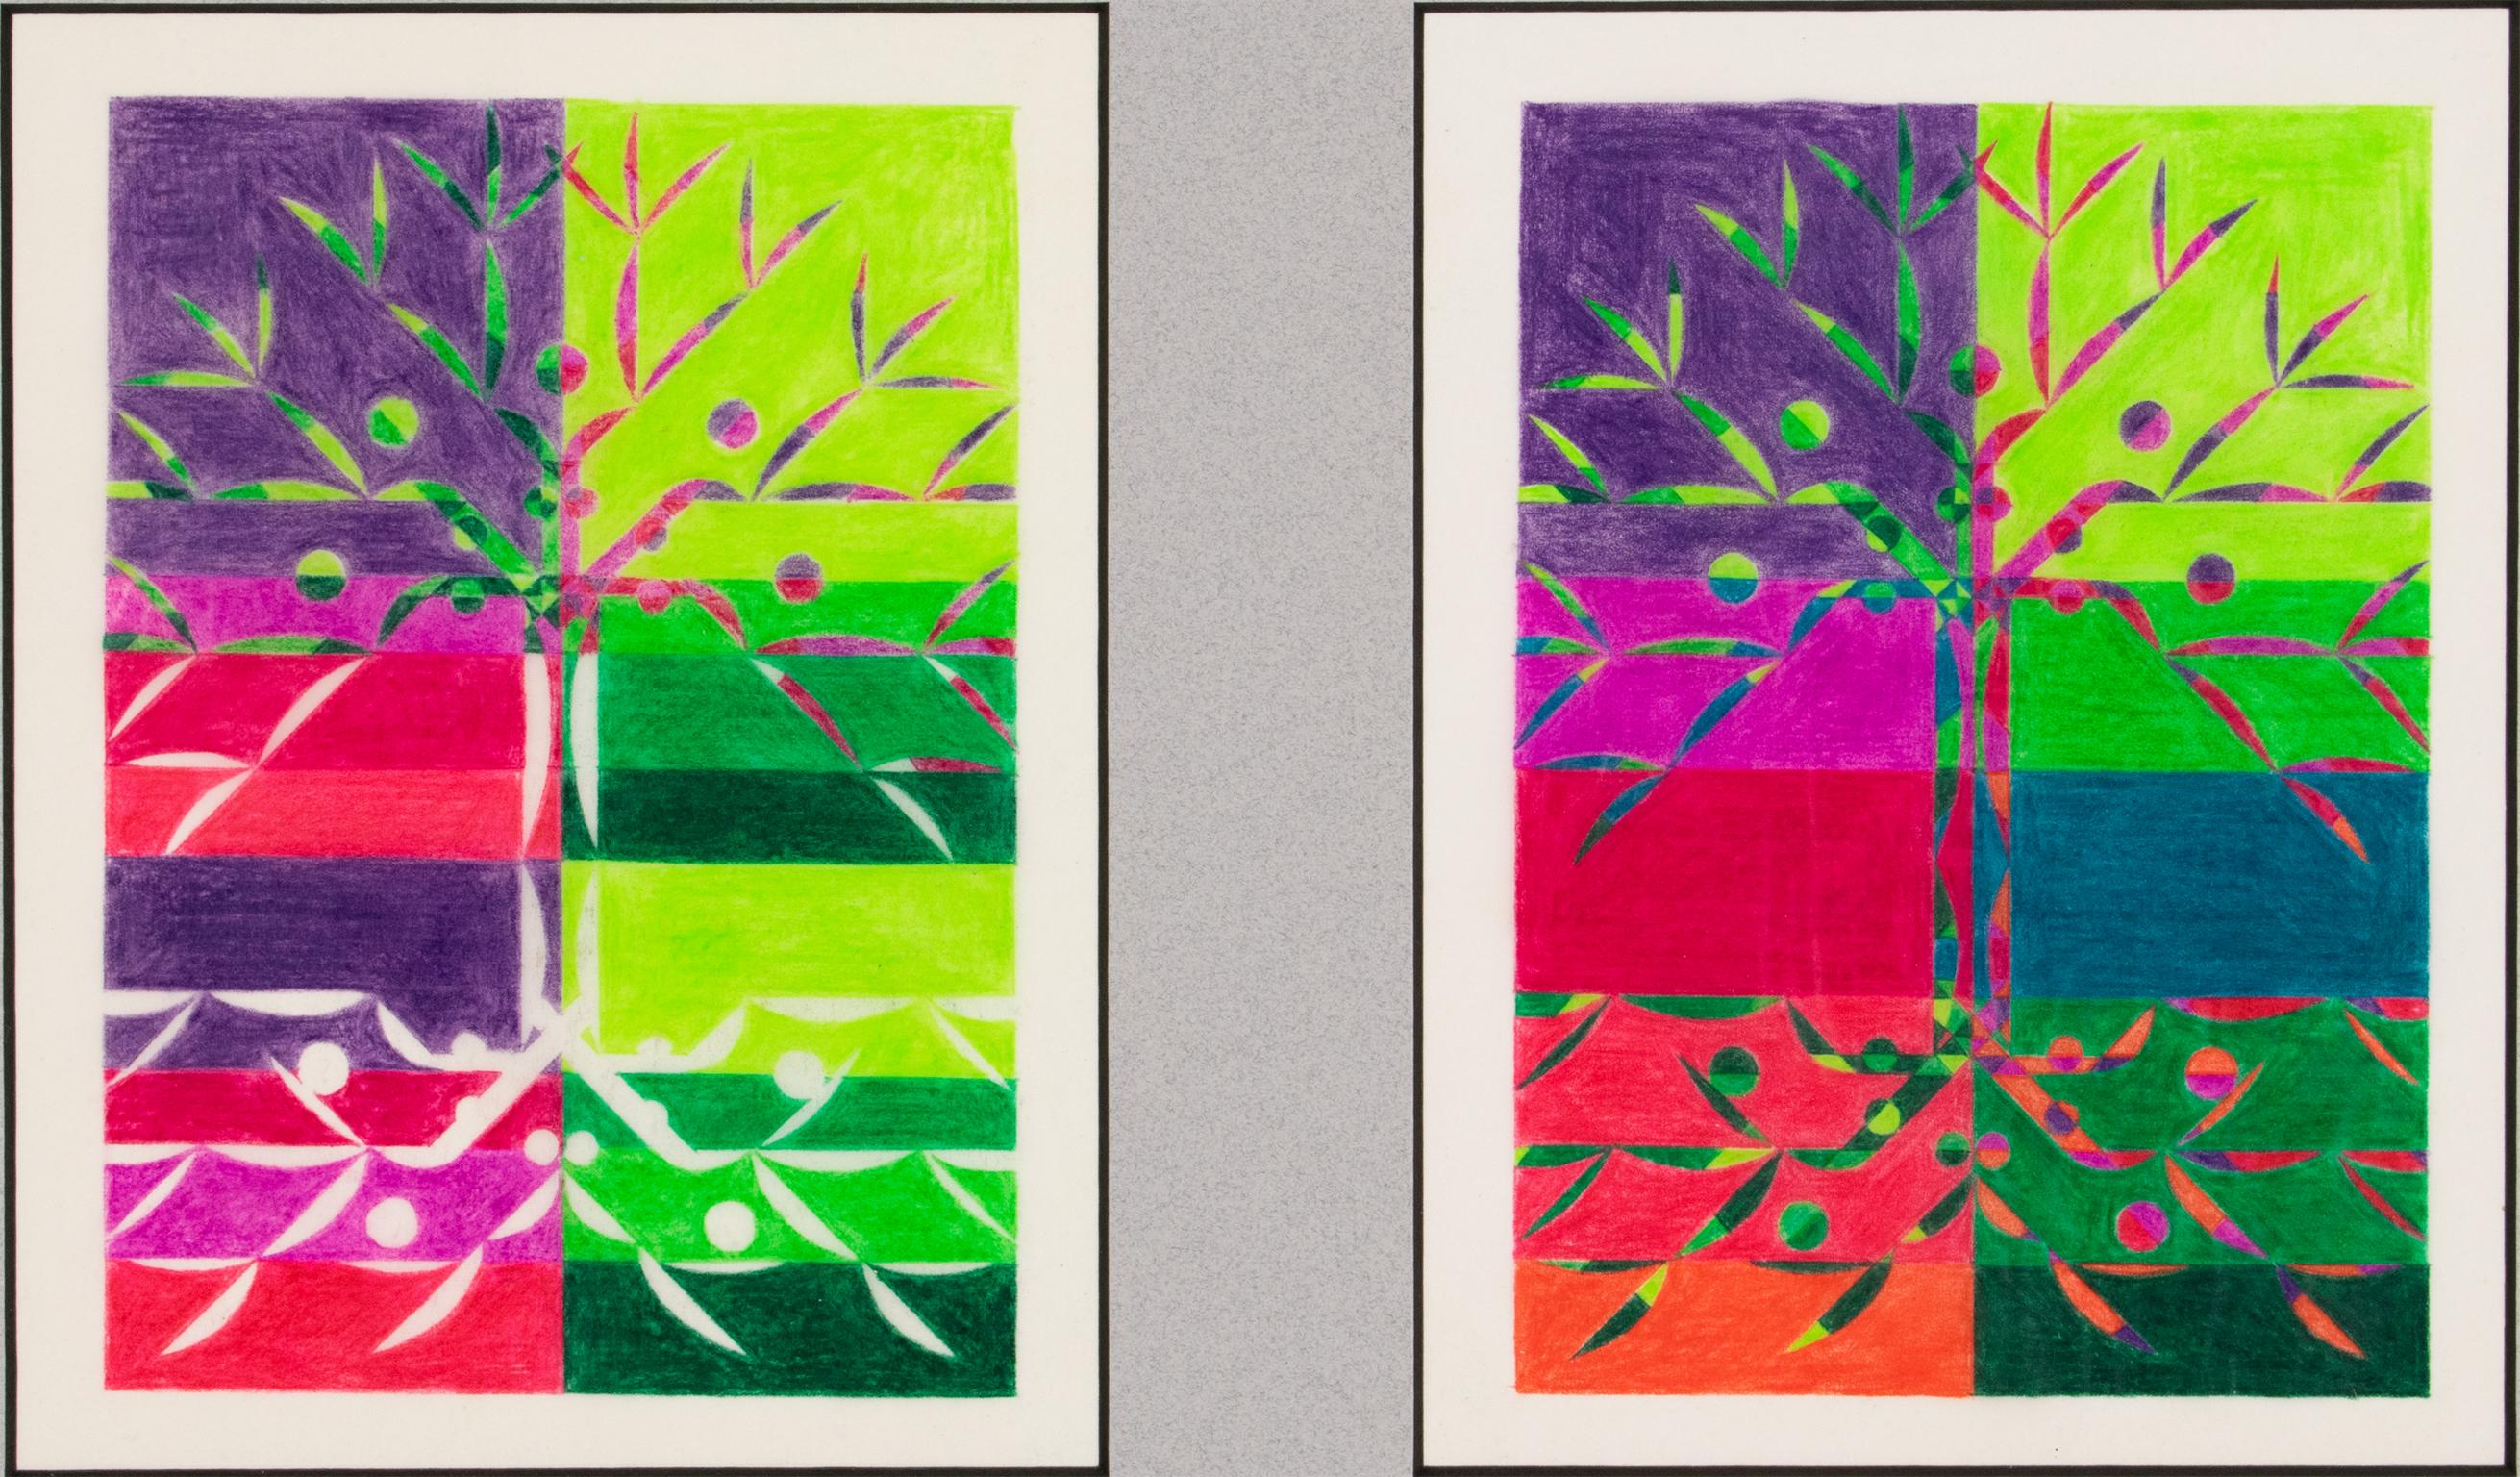 These stunning original project drawings, hand-painted with colored pencil on translucent tracing paper were designed by a French artist, circa the 1960s. The two paintings feature a geometric study of trees in color variations. There is no visible